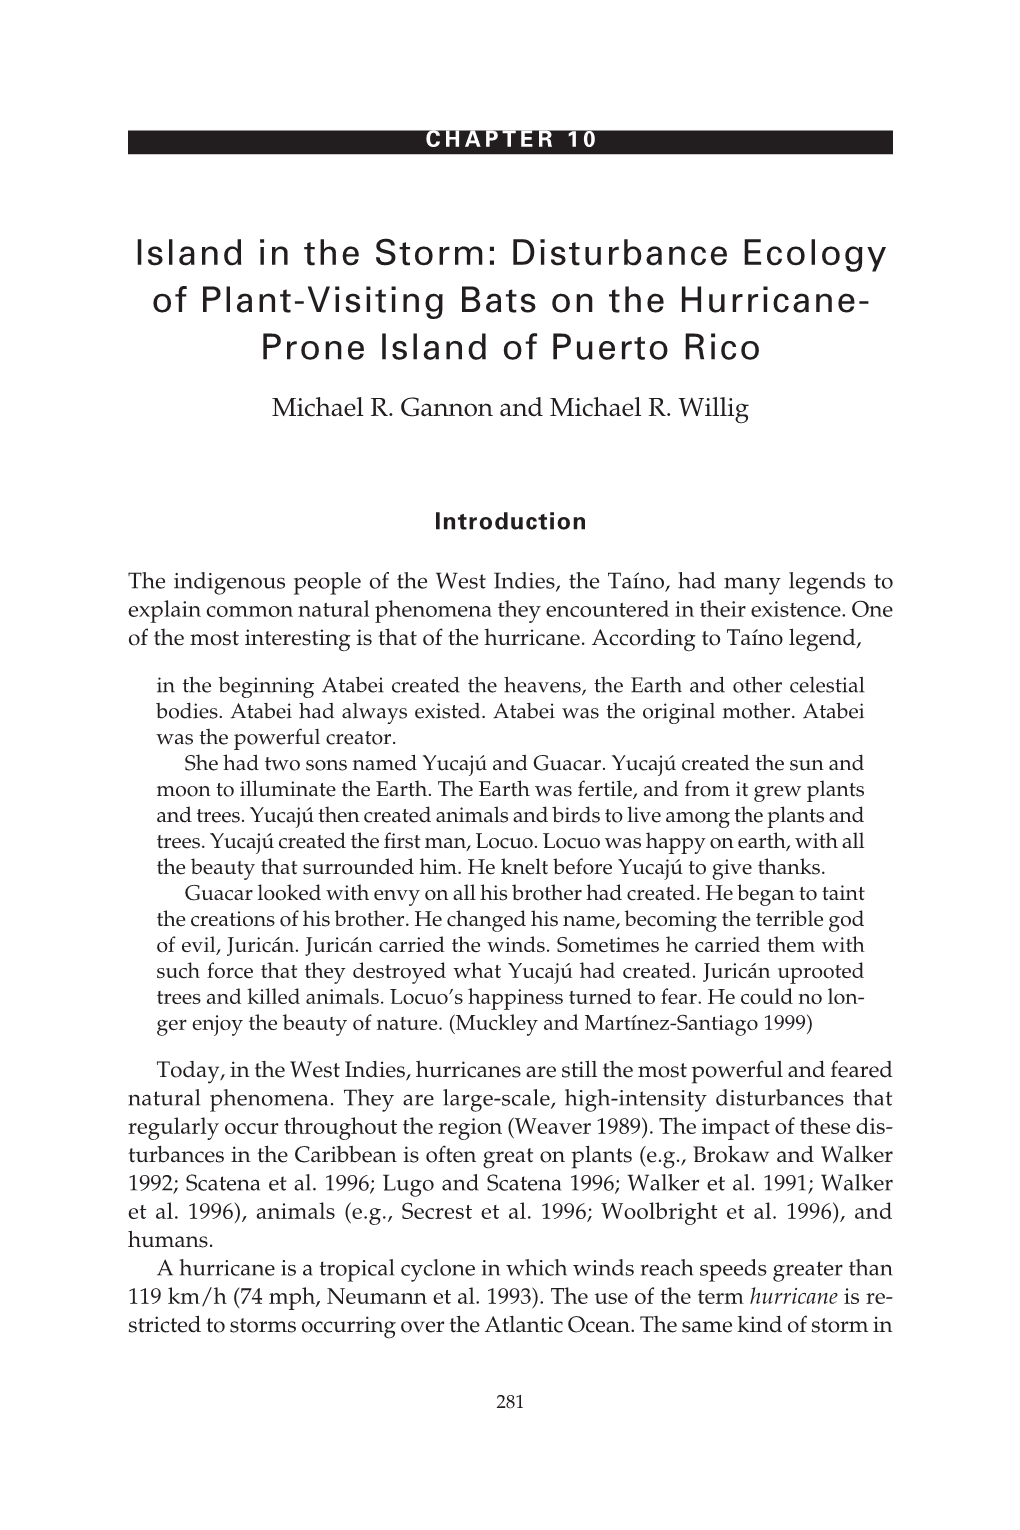 Island in the Storm: Disturbance Ecology of Plant-Visiting Bats on the Hurricane- Prone Island of Puerto Rico